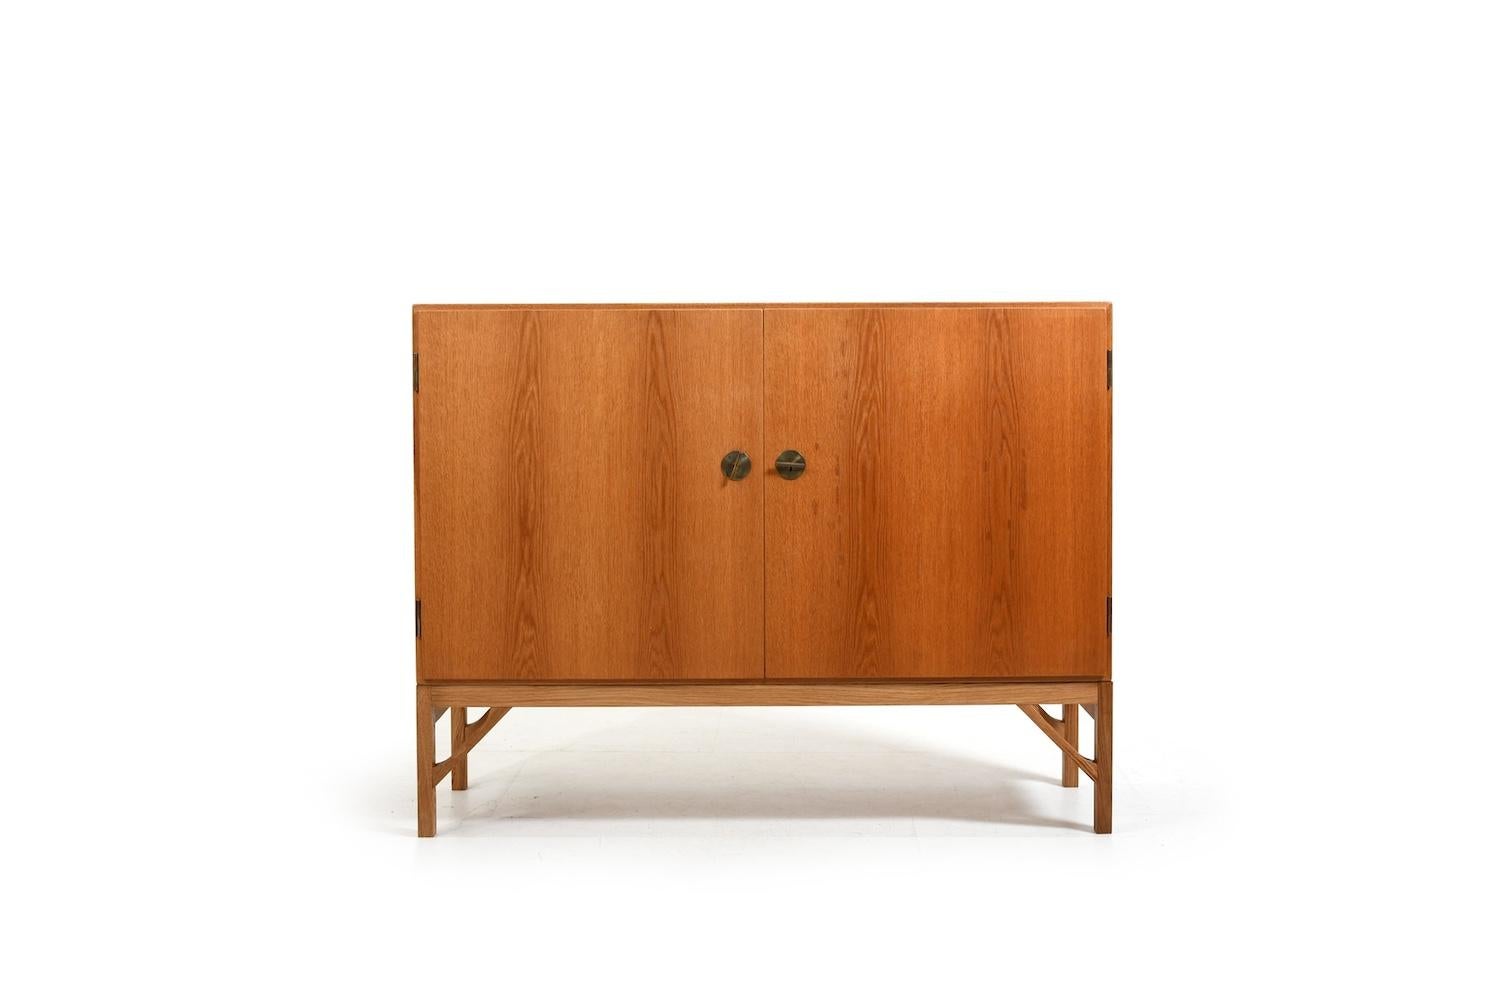 Sideboard / cabinet, model no.232 by Børge Mogensen for FDB Møbler Denmark. Brass handles. He designed his China Series in 1960s. Made in teak and base in oak. Produced 1960s.

Note. Please have a look on the matching cabinet with bookcase in our